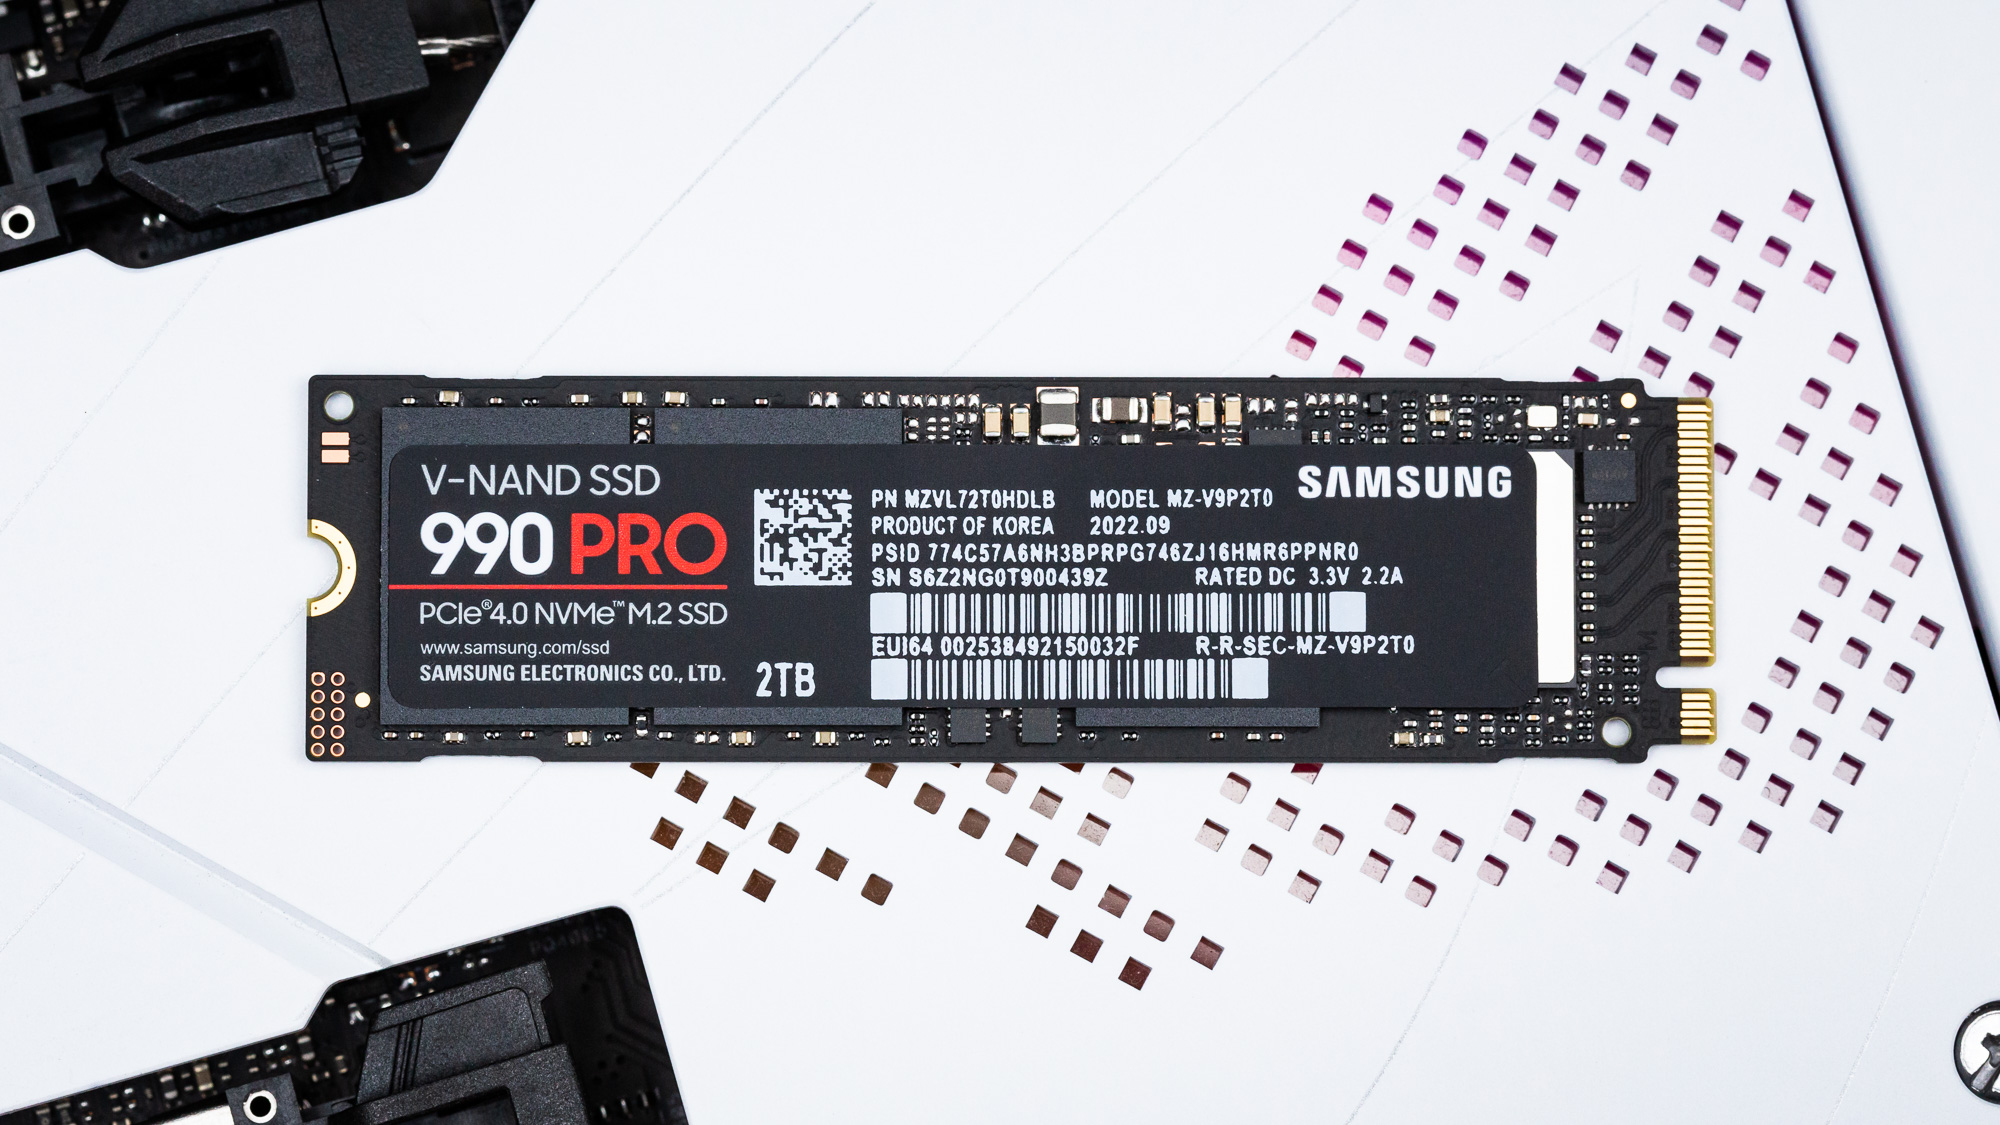 2TB Performance Results - Samsung 990 Pro SSD Review: The Return